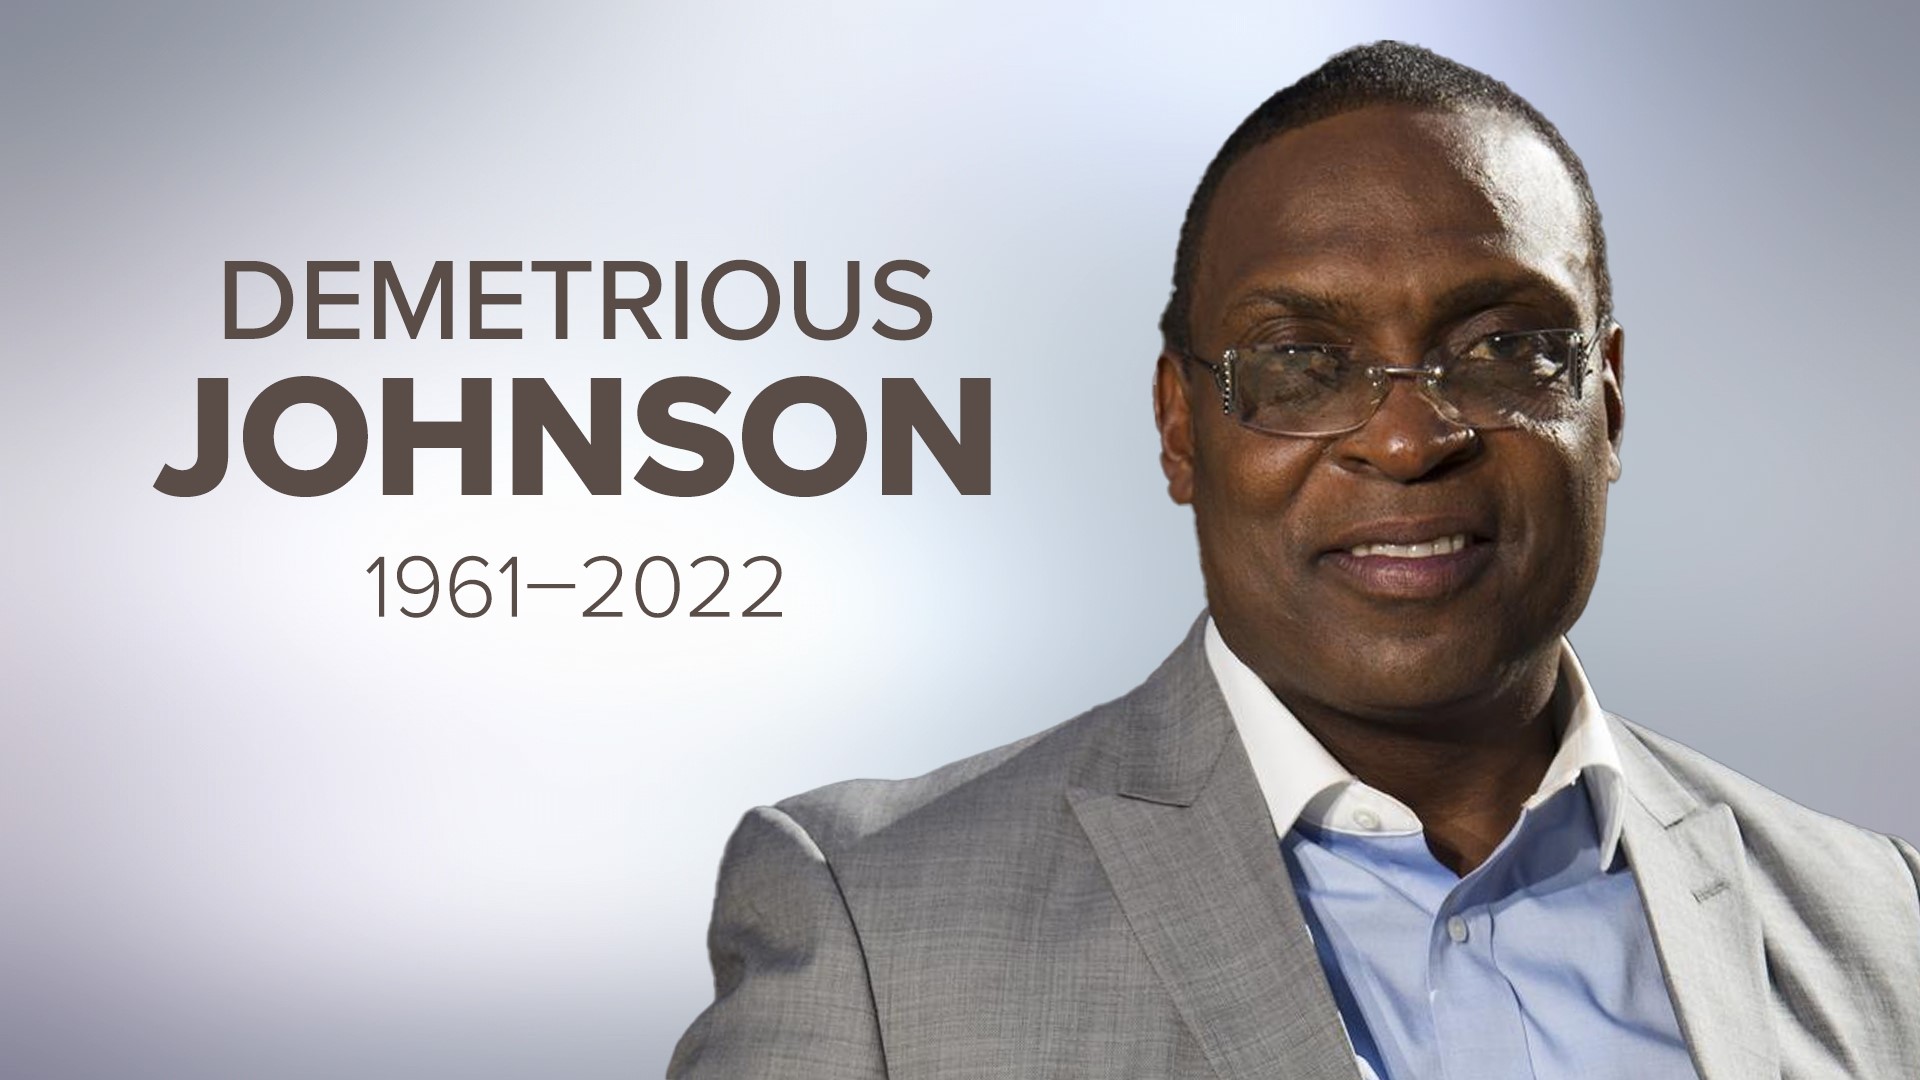 Demetrious Johnson, the St. Louis philanthropist who played five seasons in the NFL, left his mark not only in the local community but the world.